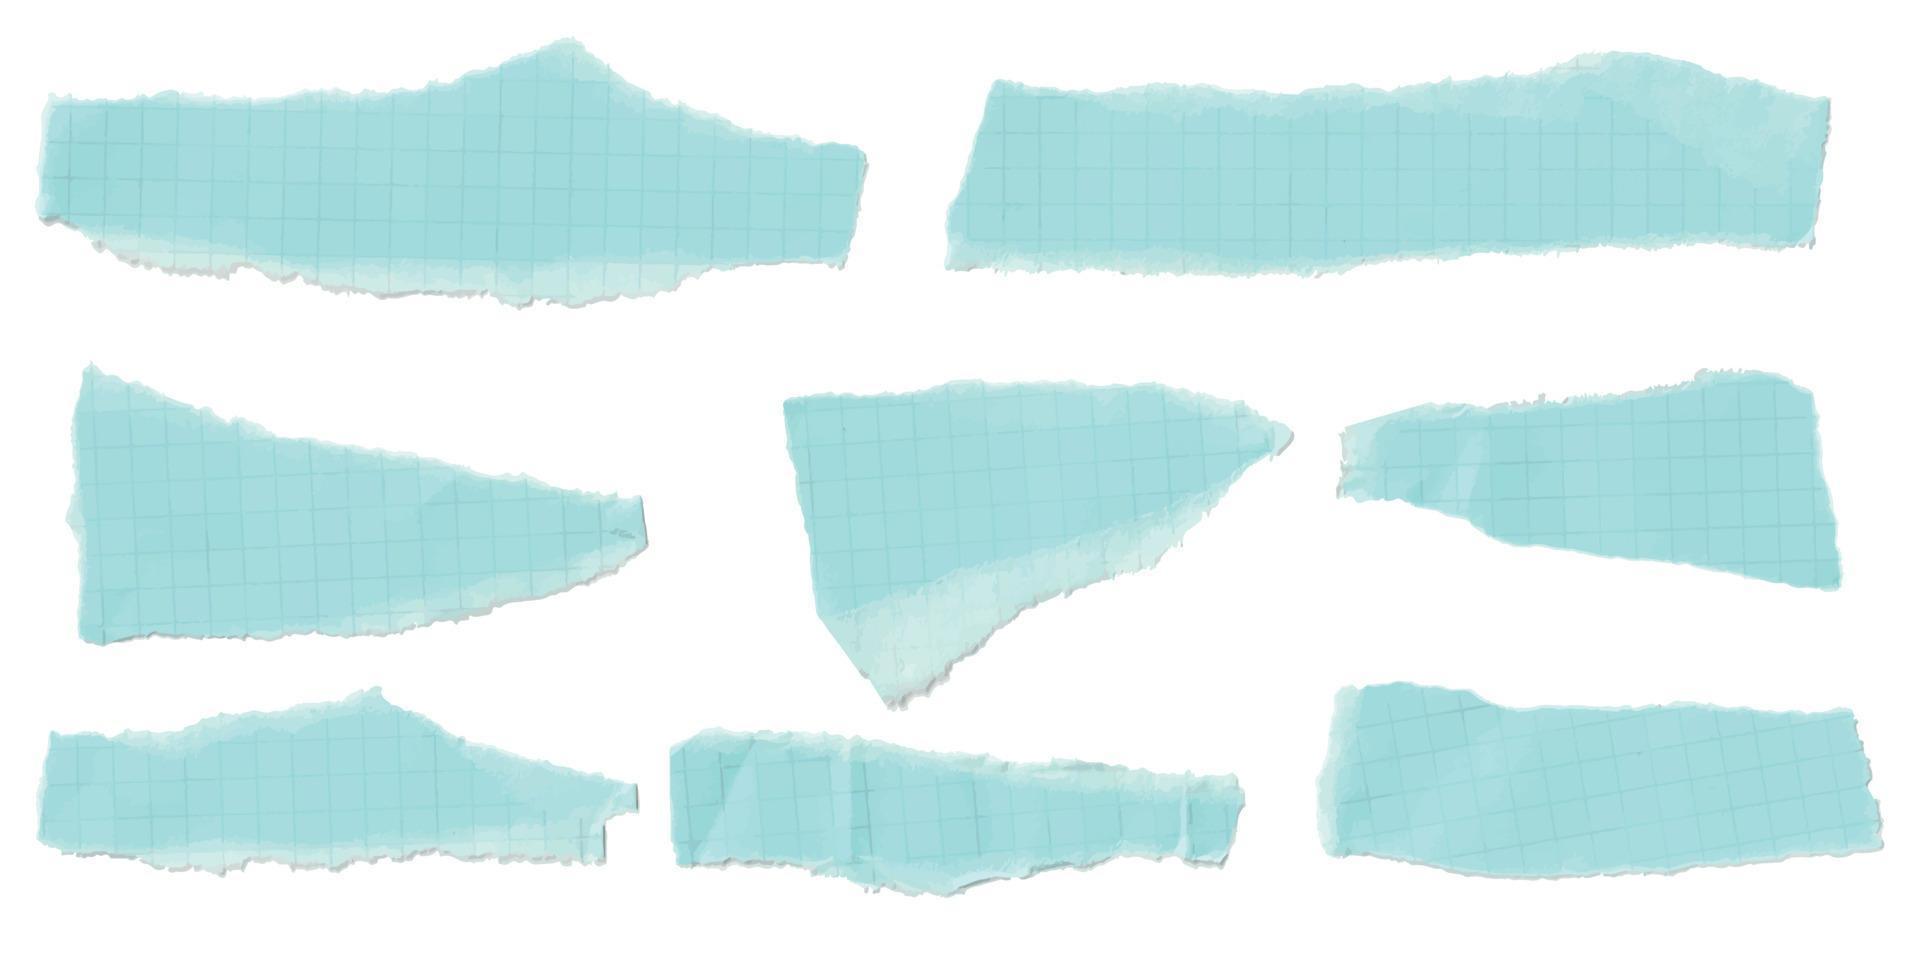 Vector illustration of torn pieces of paper. Graphics texture background for design.